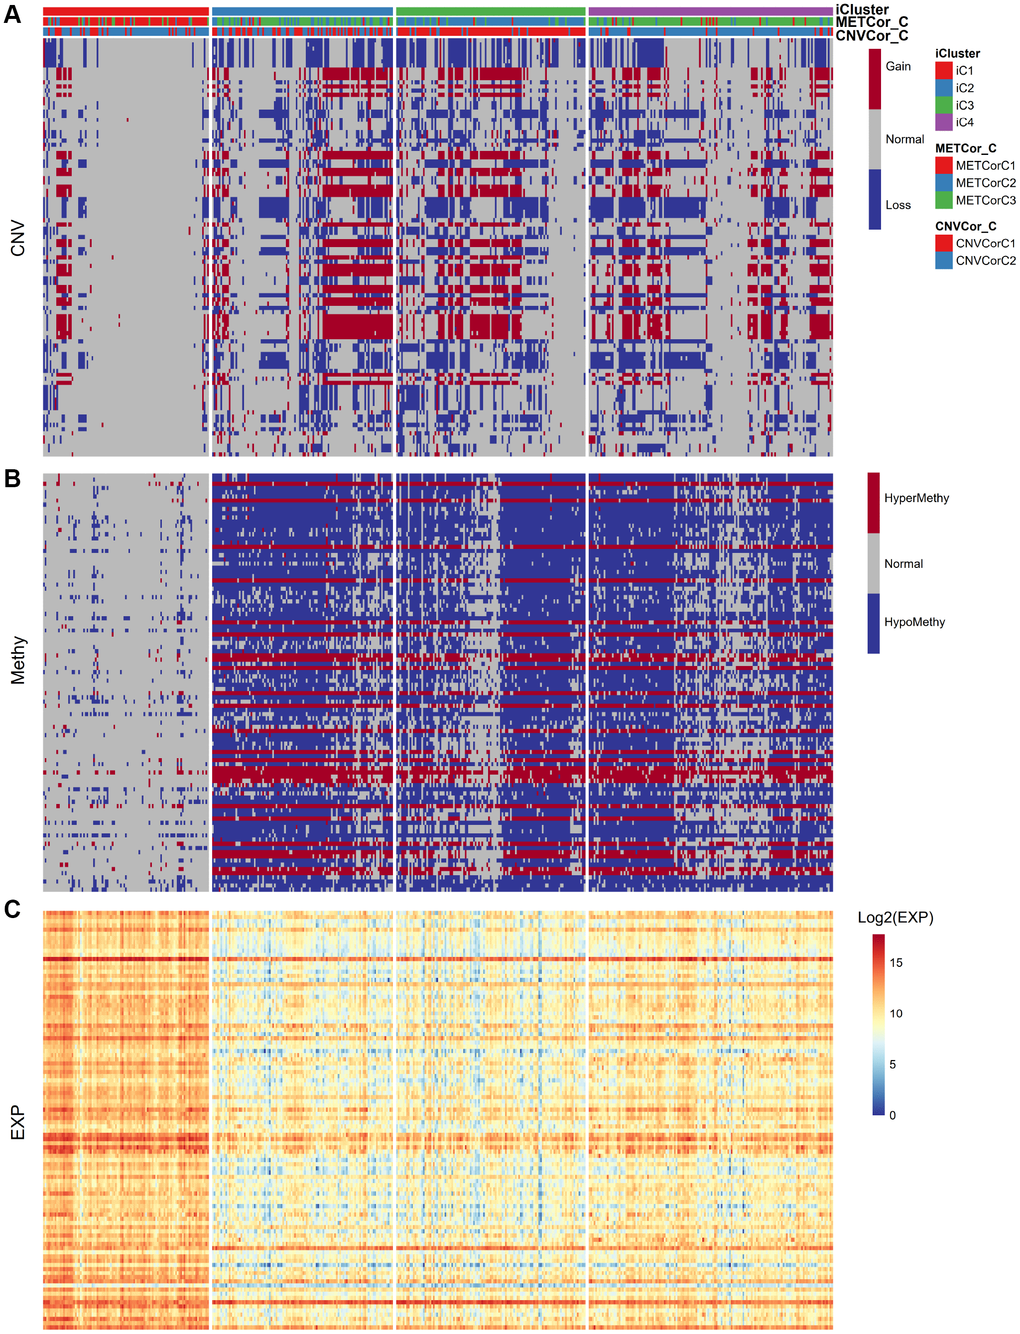 Identification of general molecular features of SKCM subtypes. (A) Distribution of DNA CNVs in iCluster subtypes. (B) Distribution of DNA MET in iCluster subtypes. (C) Heatmap of DEGs among iCluster subtypes.